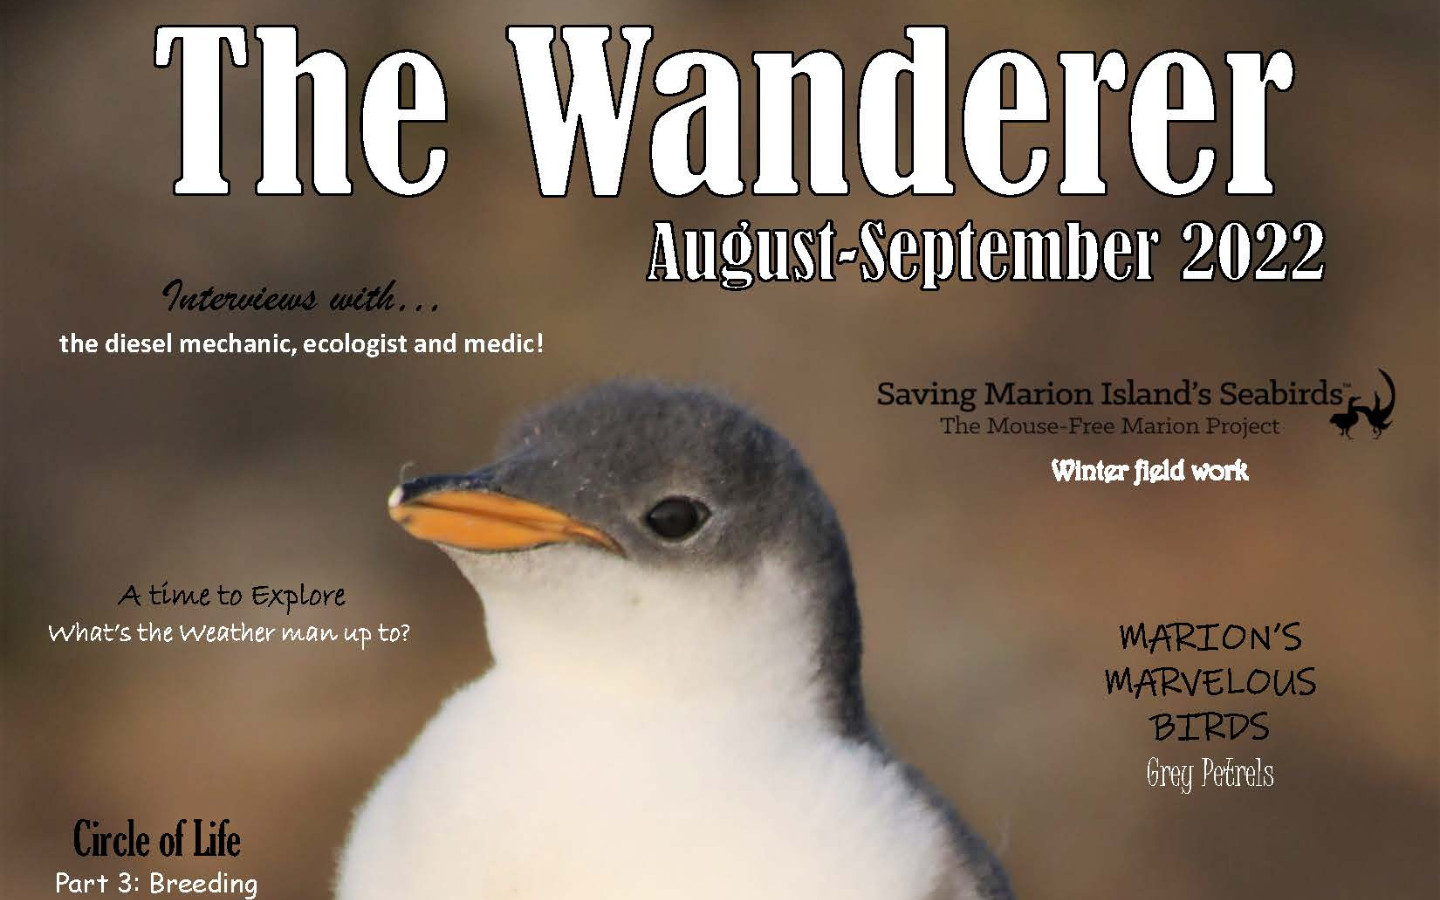 The Wanderer – August to September 2022 issue is out